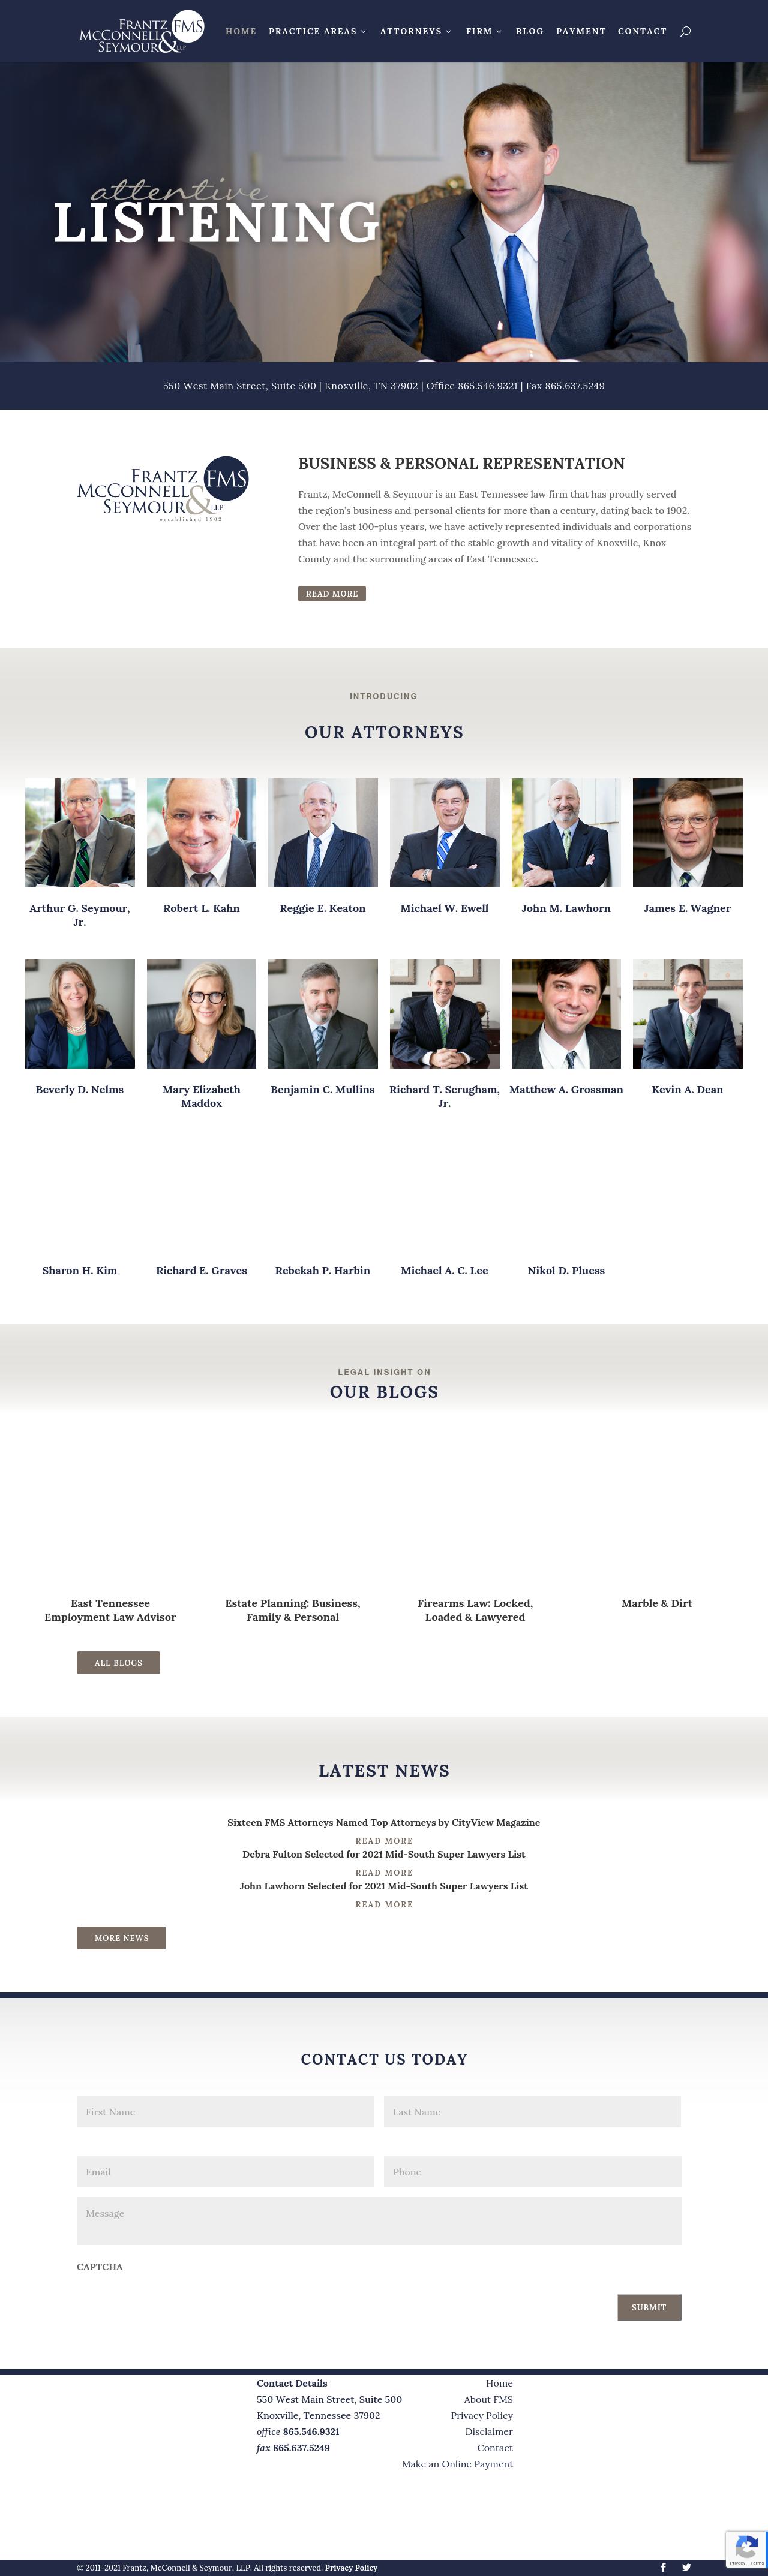 Frantz, McConnell & Seymour, LLP - Knoxville TN Lawyers